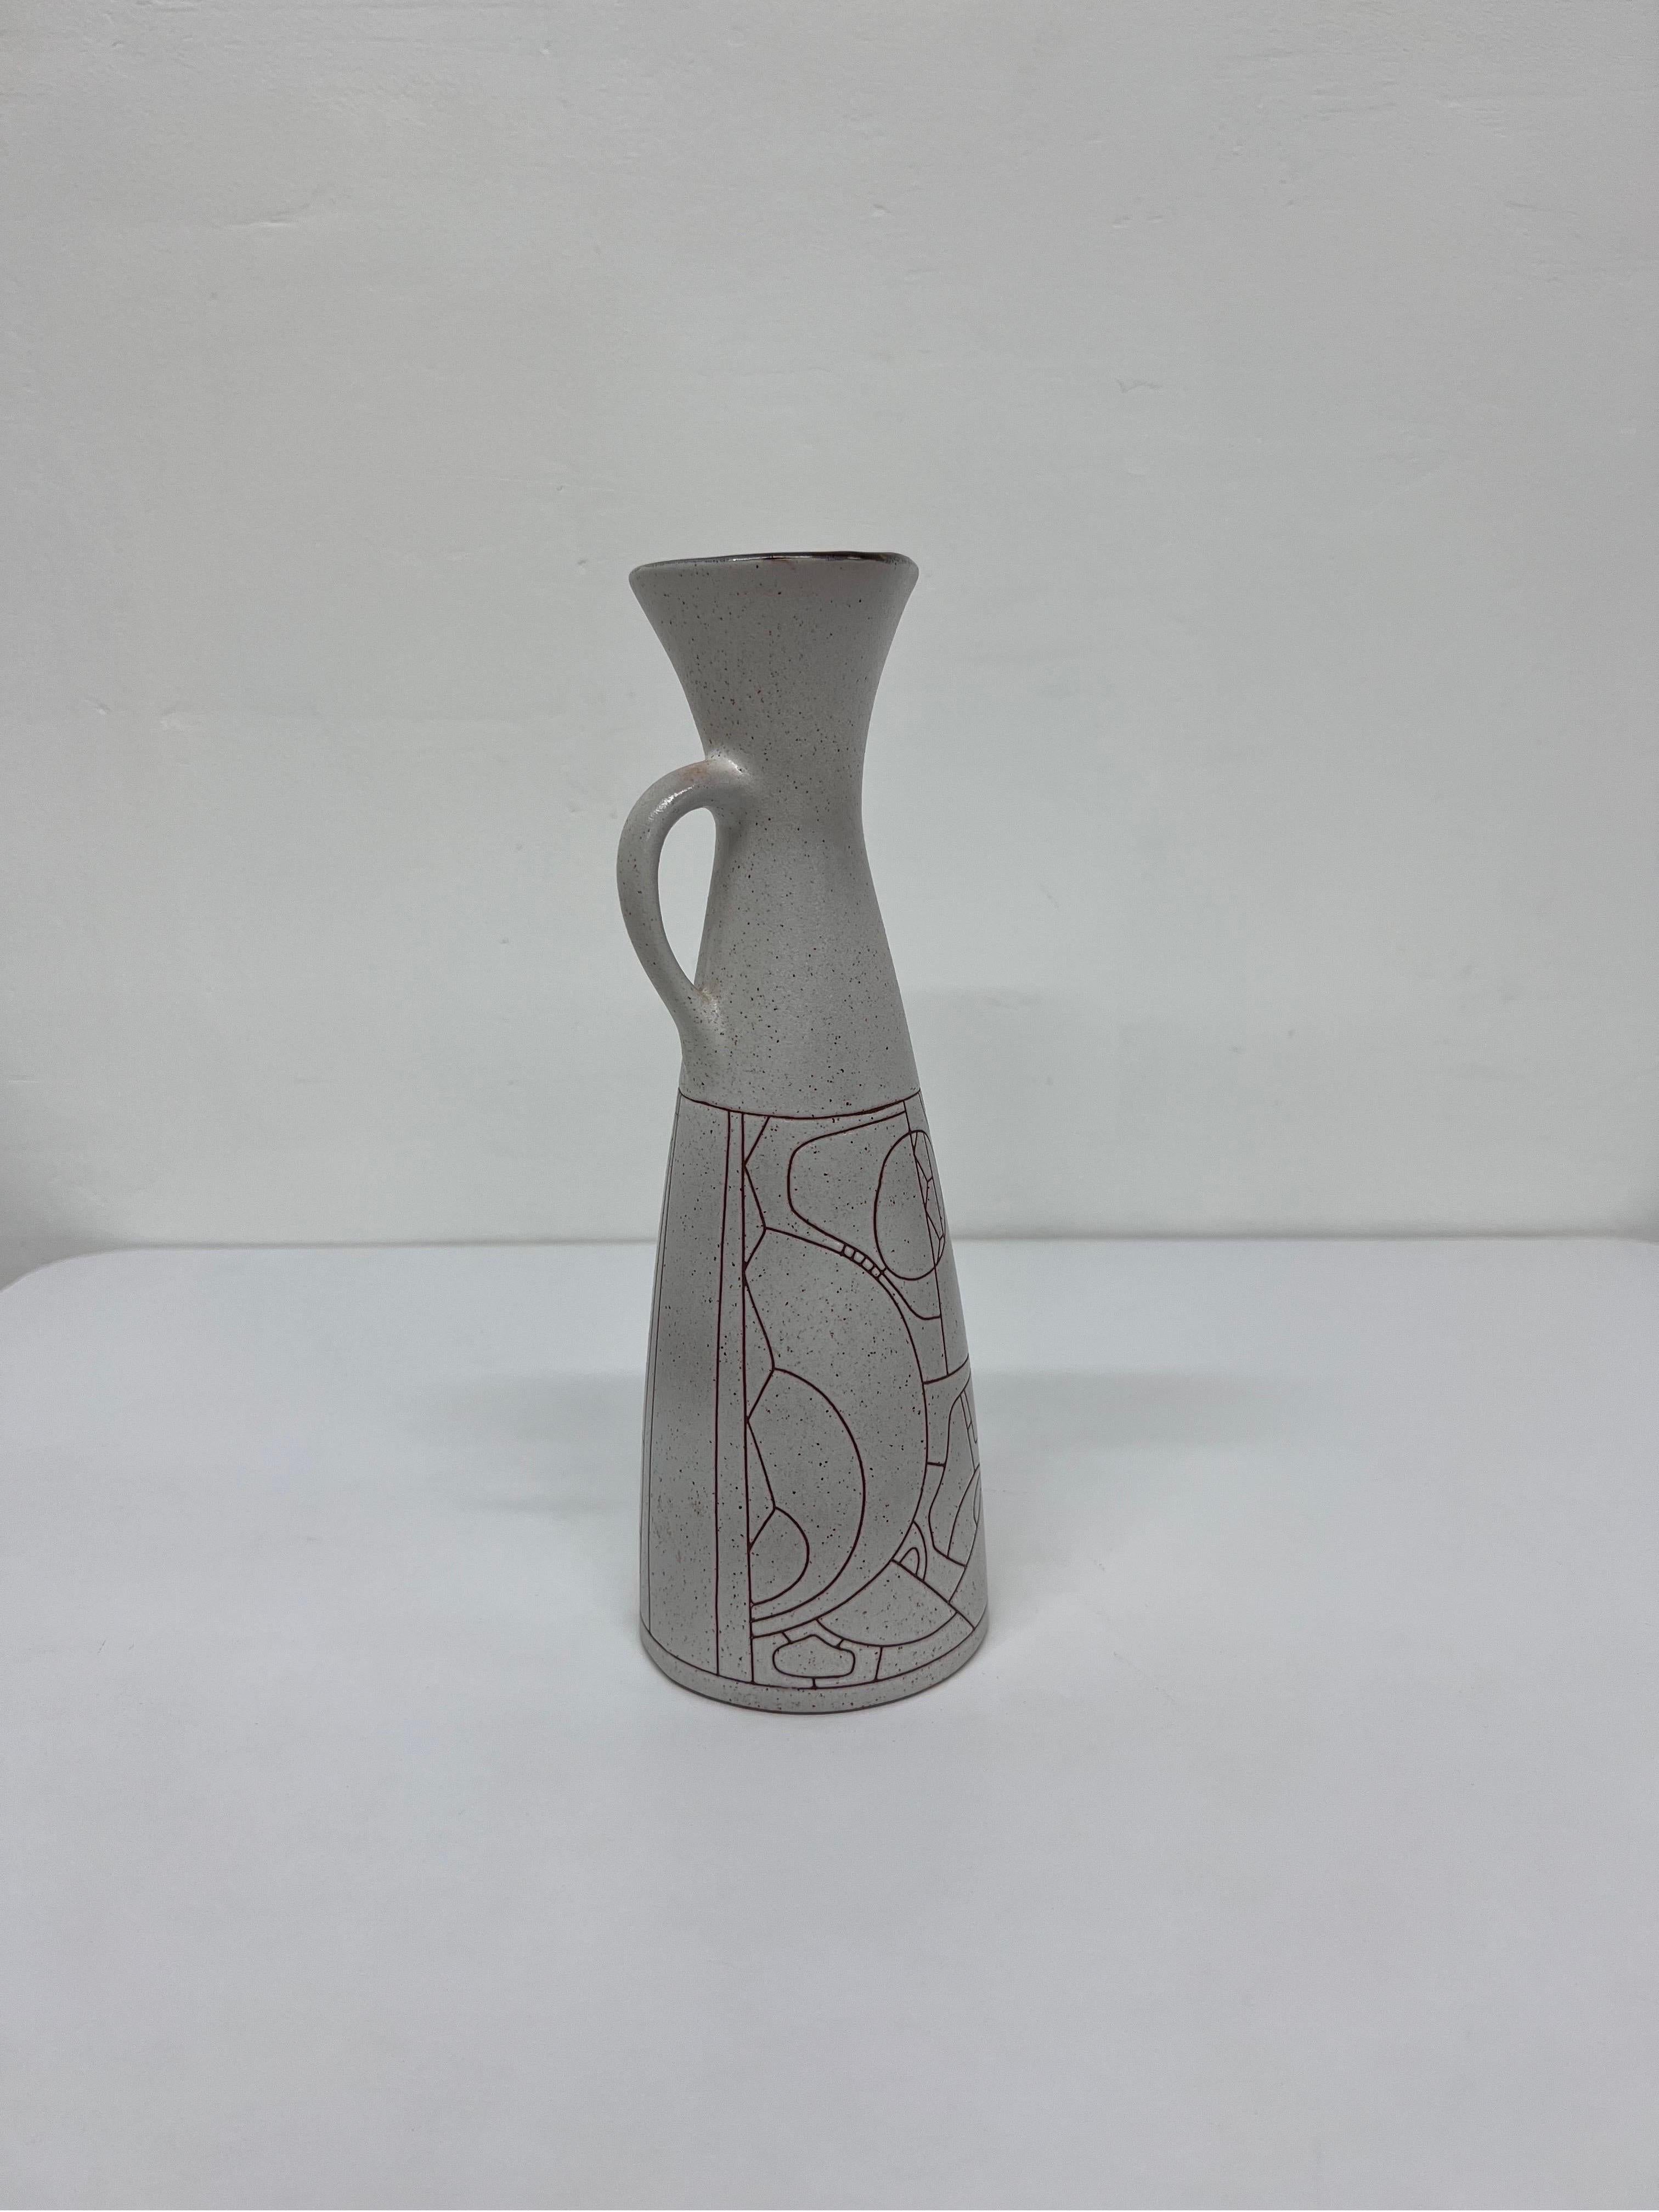 20th Century Modernist Geometric Stoneware Carafe or Pitcher by Lapid Israel Pottery